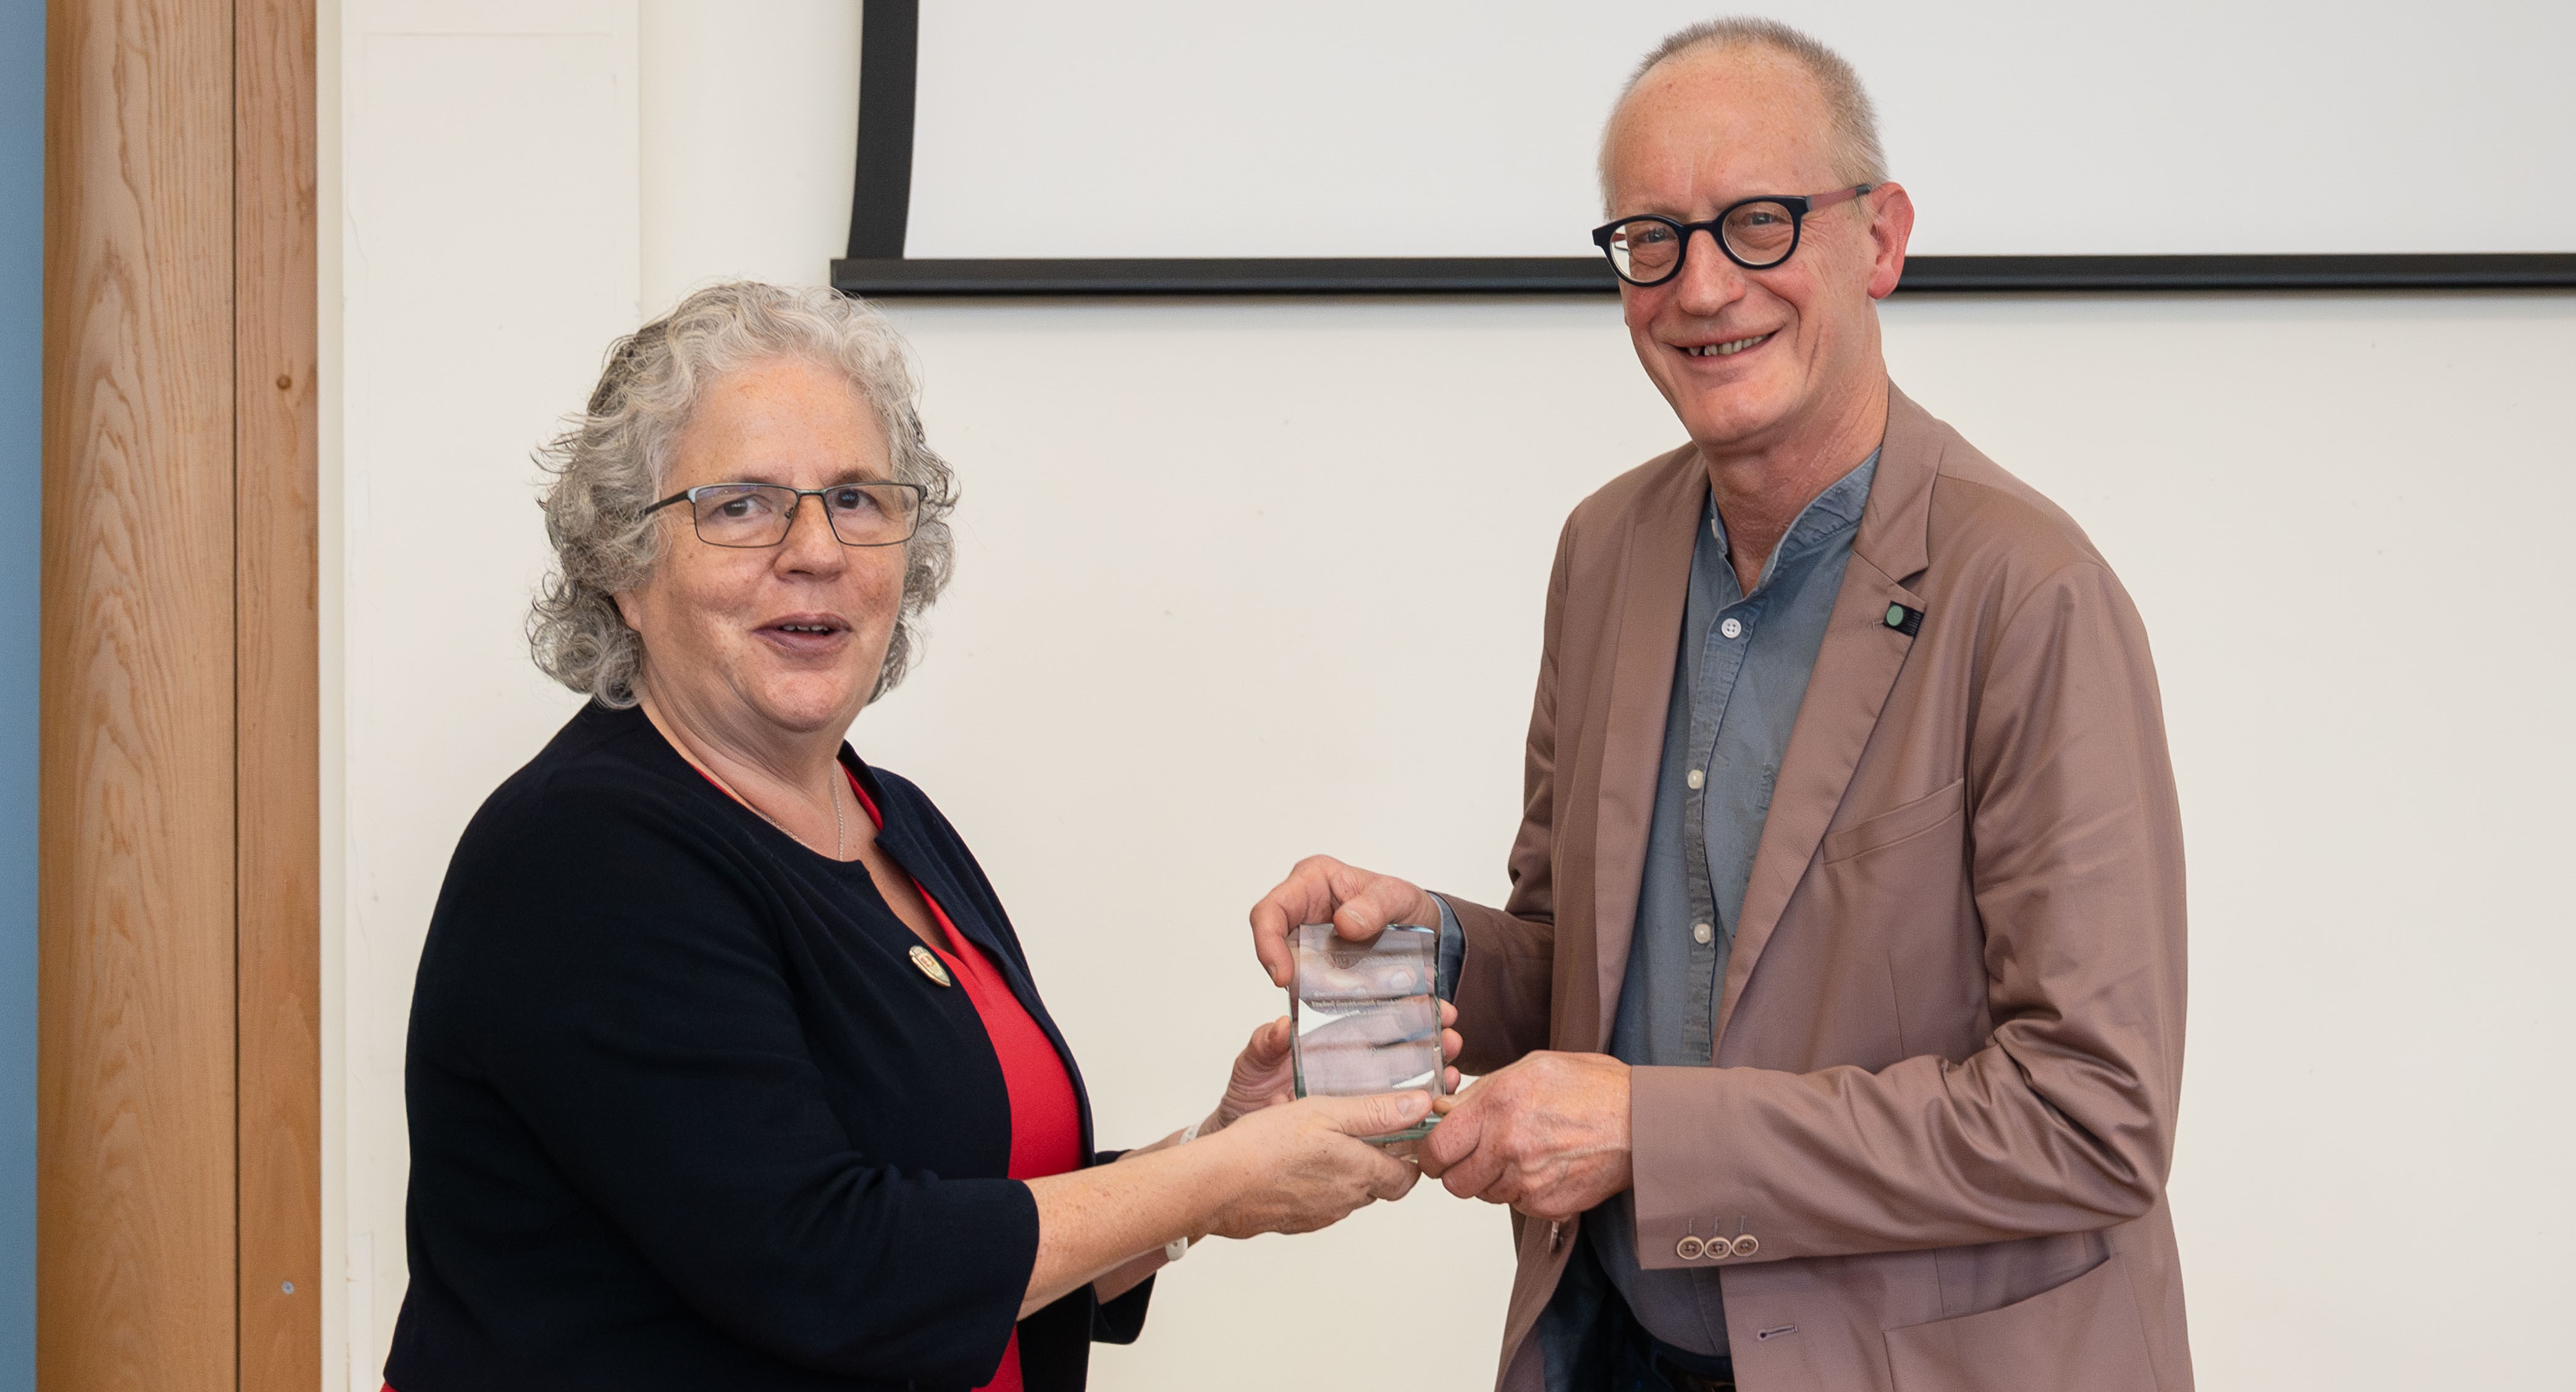 Professor Elizabeth Treasure, Vice-Chancellor of Aberystwyth University, presenting the Award for Exceptional Research Impact to Professor Ryszard Piotrwicz.